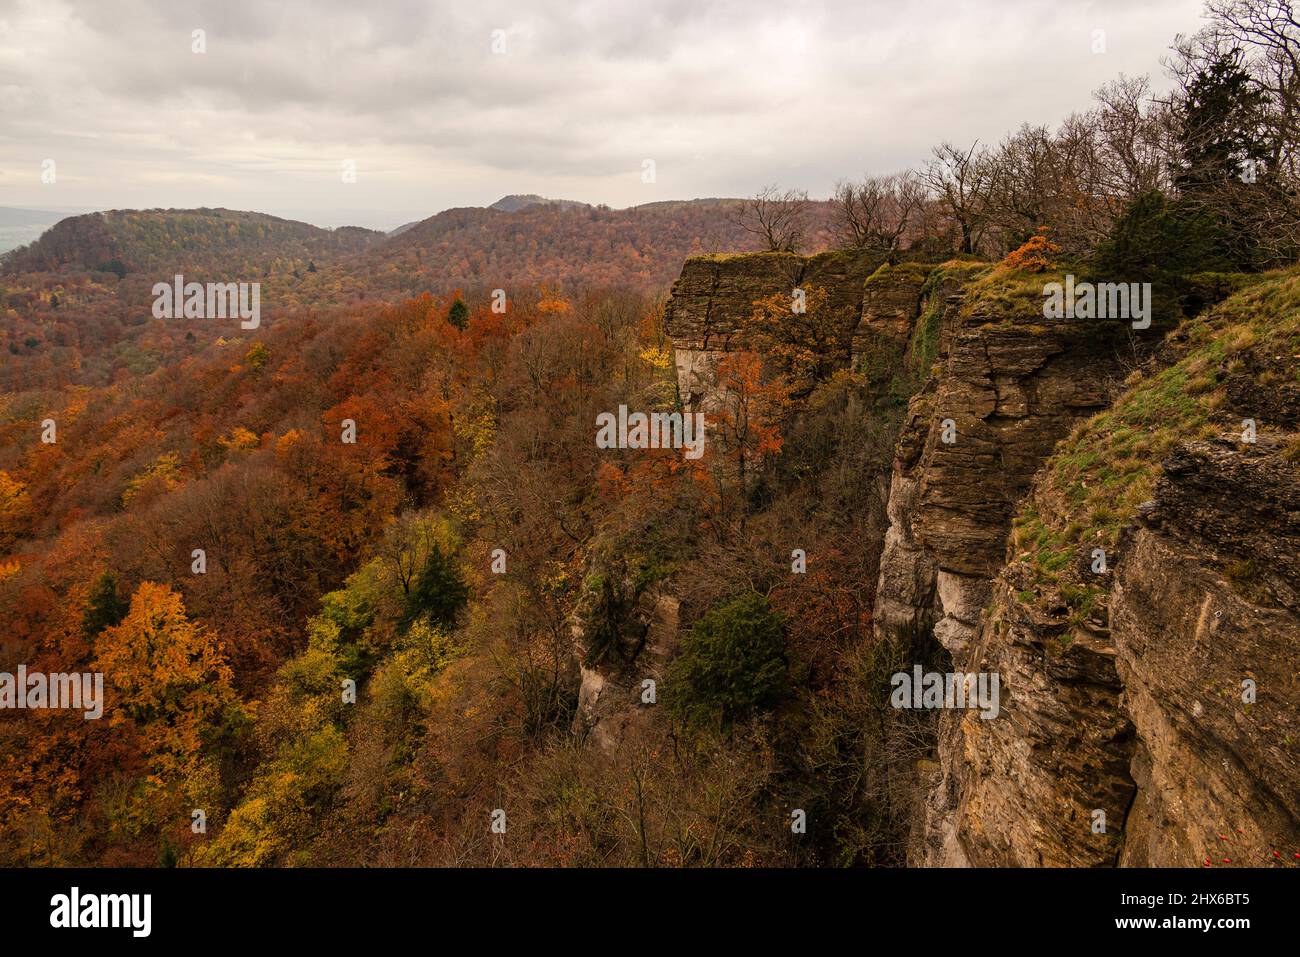 Beautiful wide view over an autumnal forest landscape, seen from the Hohenstein rock plateau, Süntel, Weser Uplands, Lower Saxony, Germany Stock Photo